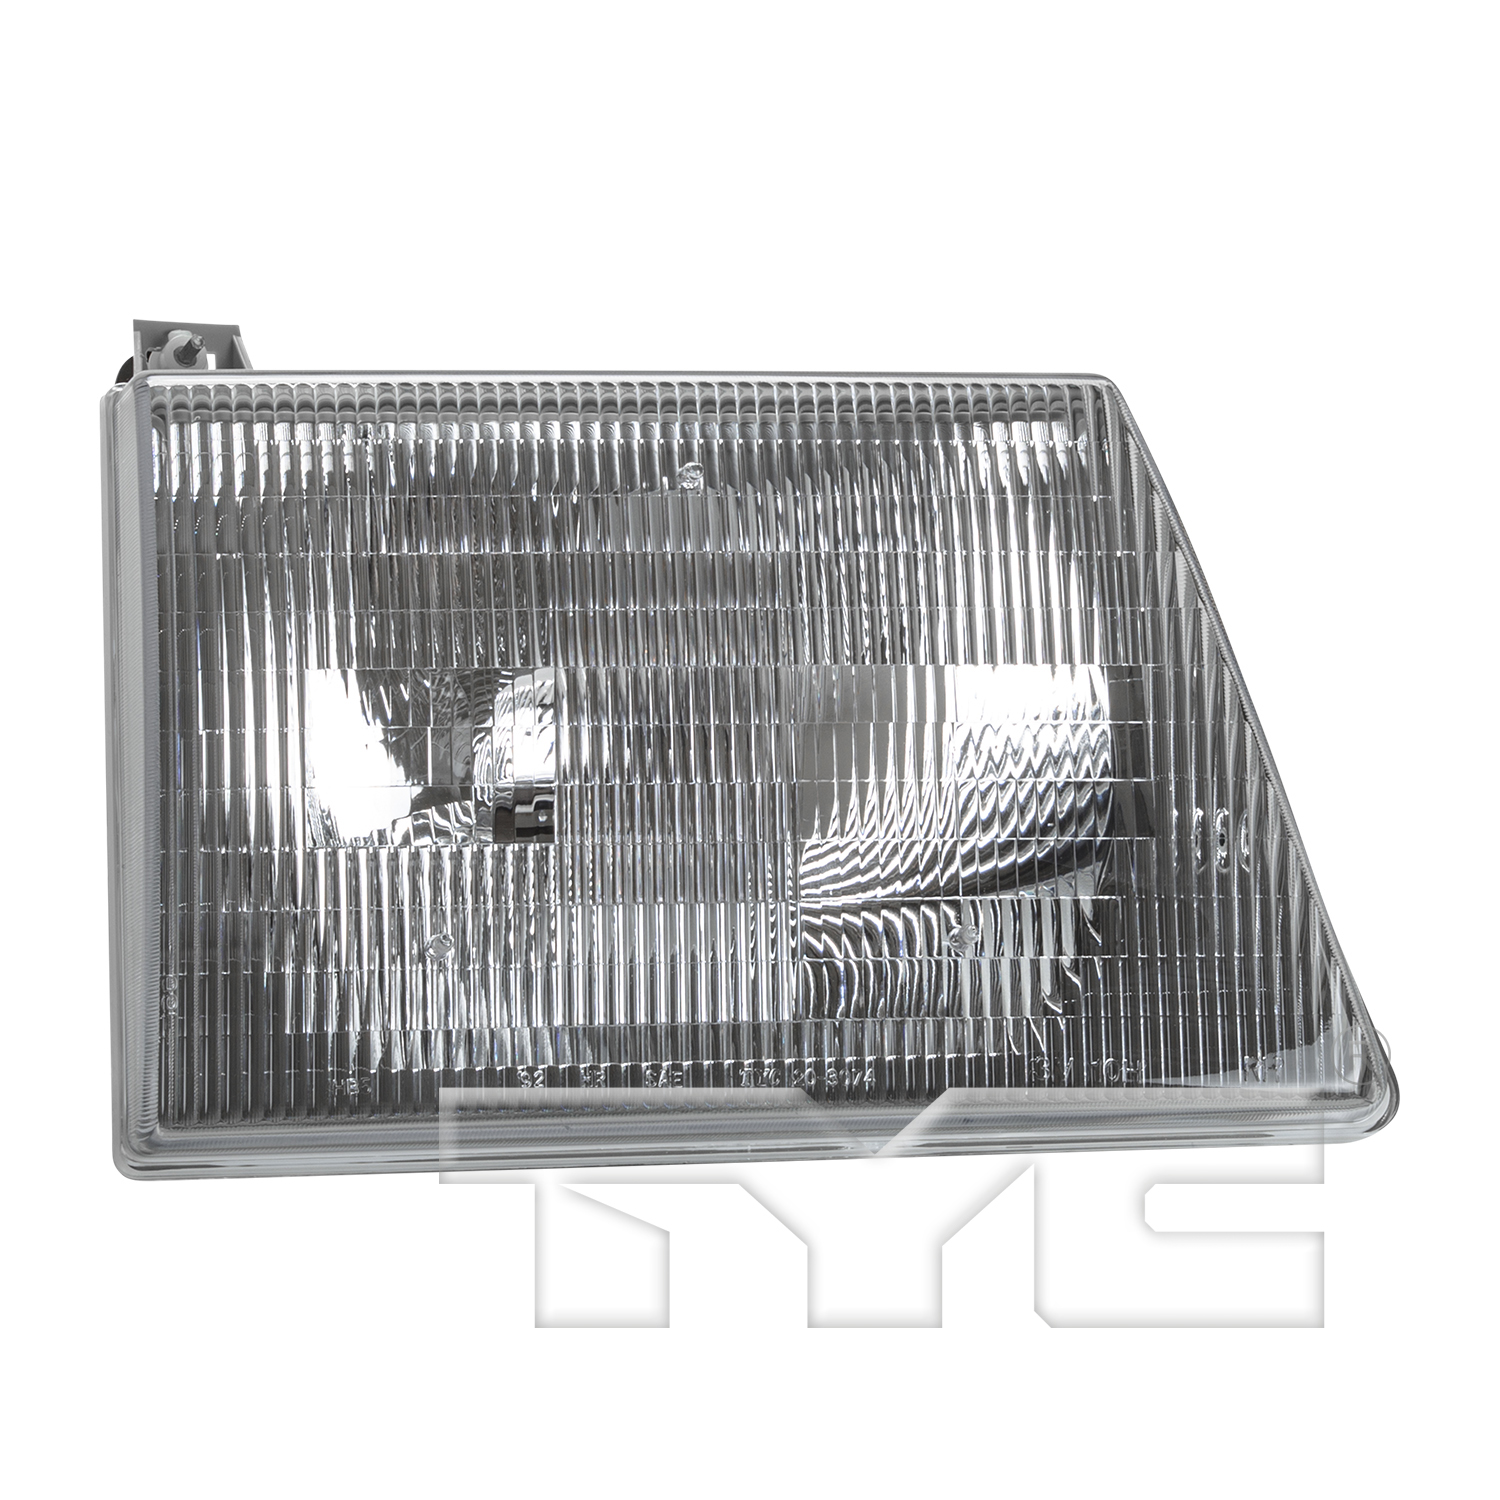 Aftermarket HEADLIGHTS for FORD - E-450 SUPER DUTY, E-450 SUPER DUTY,03-07,RT Headlamp assy composite